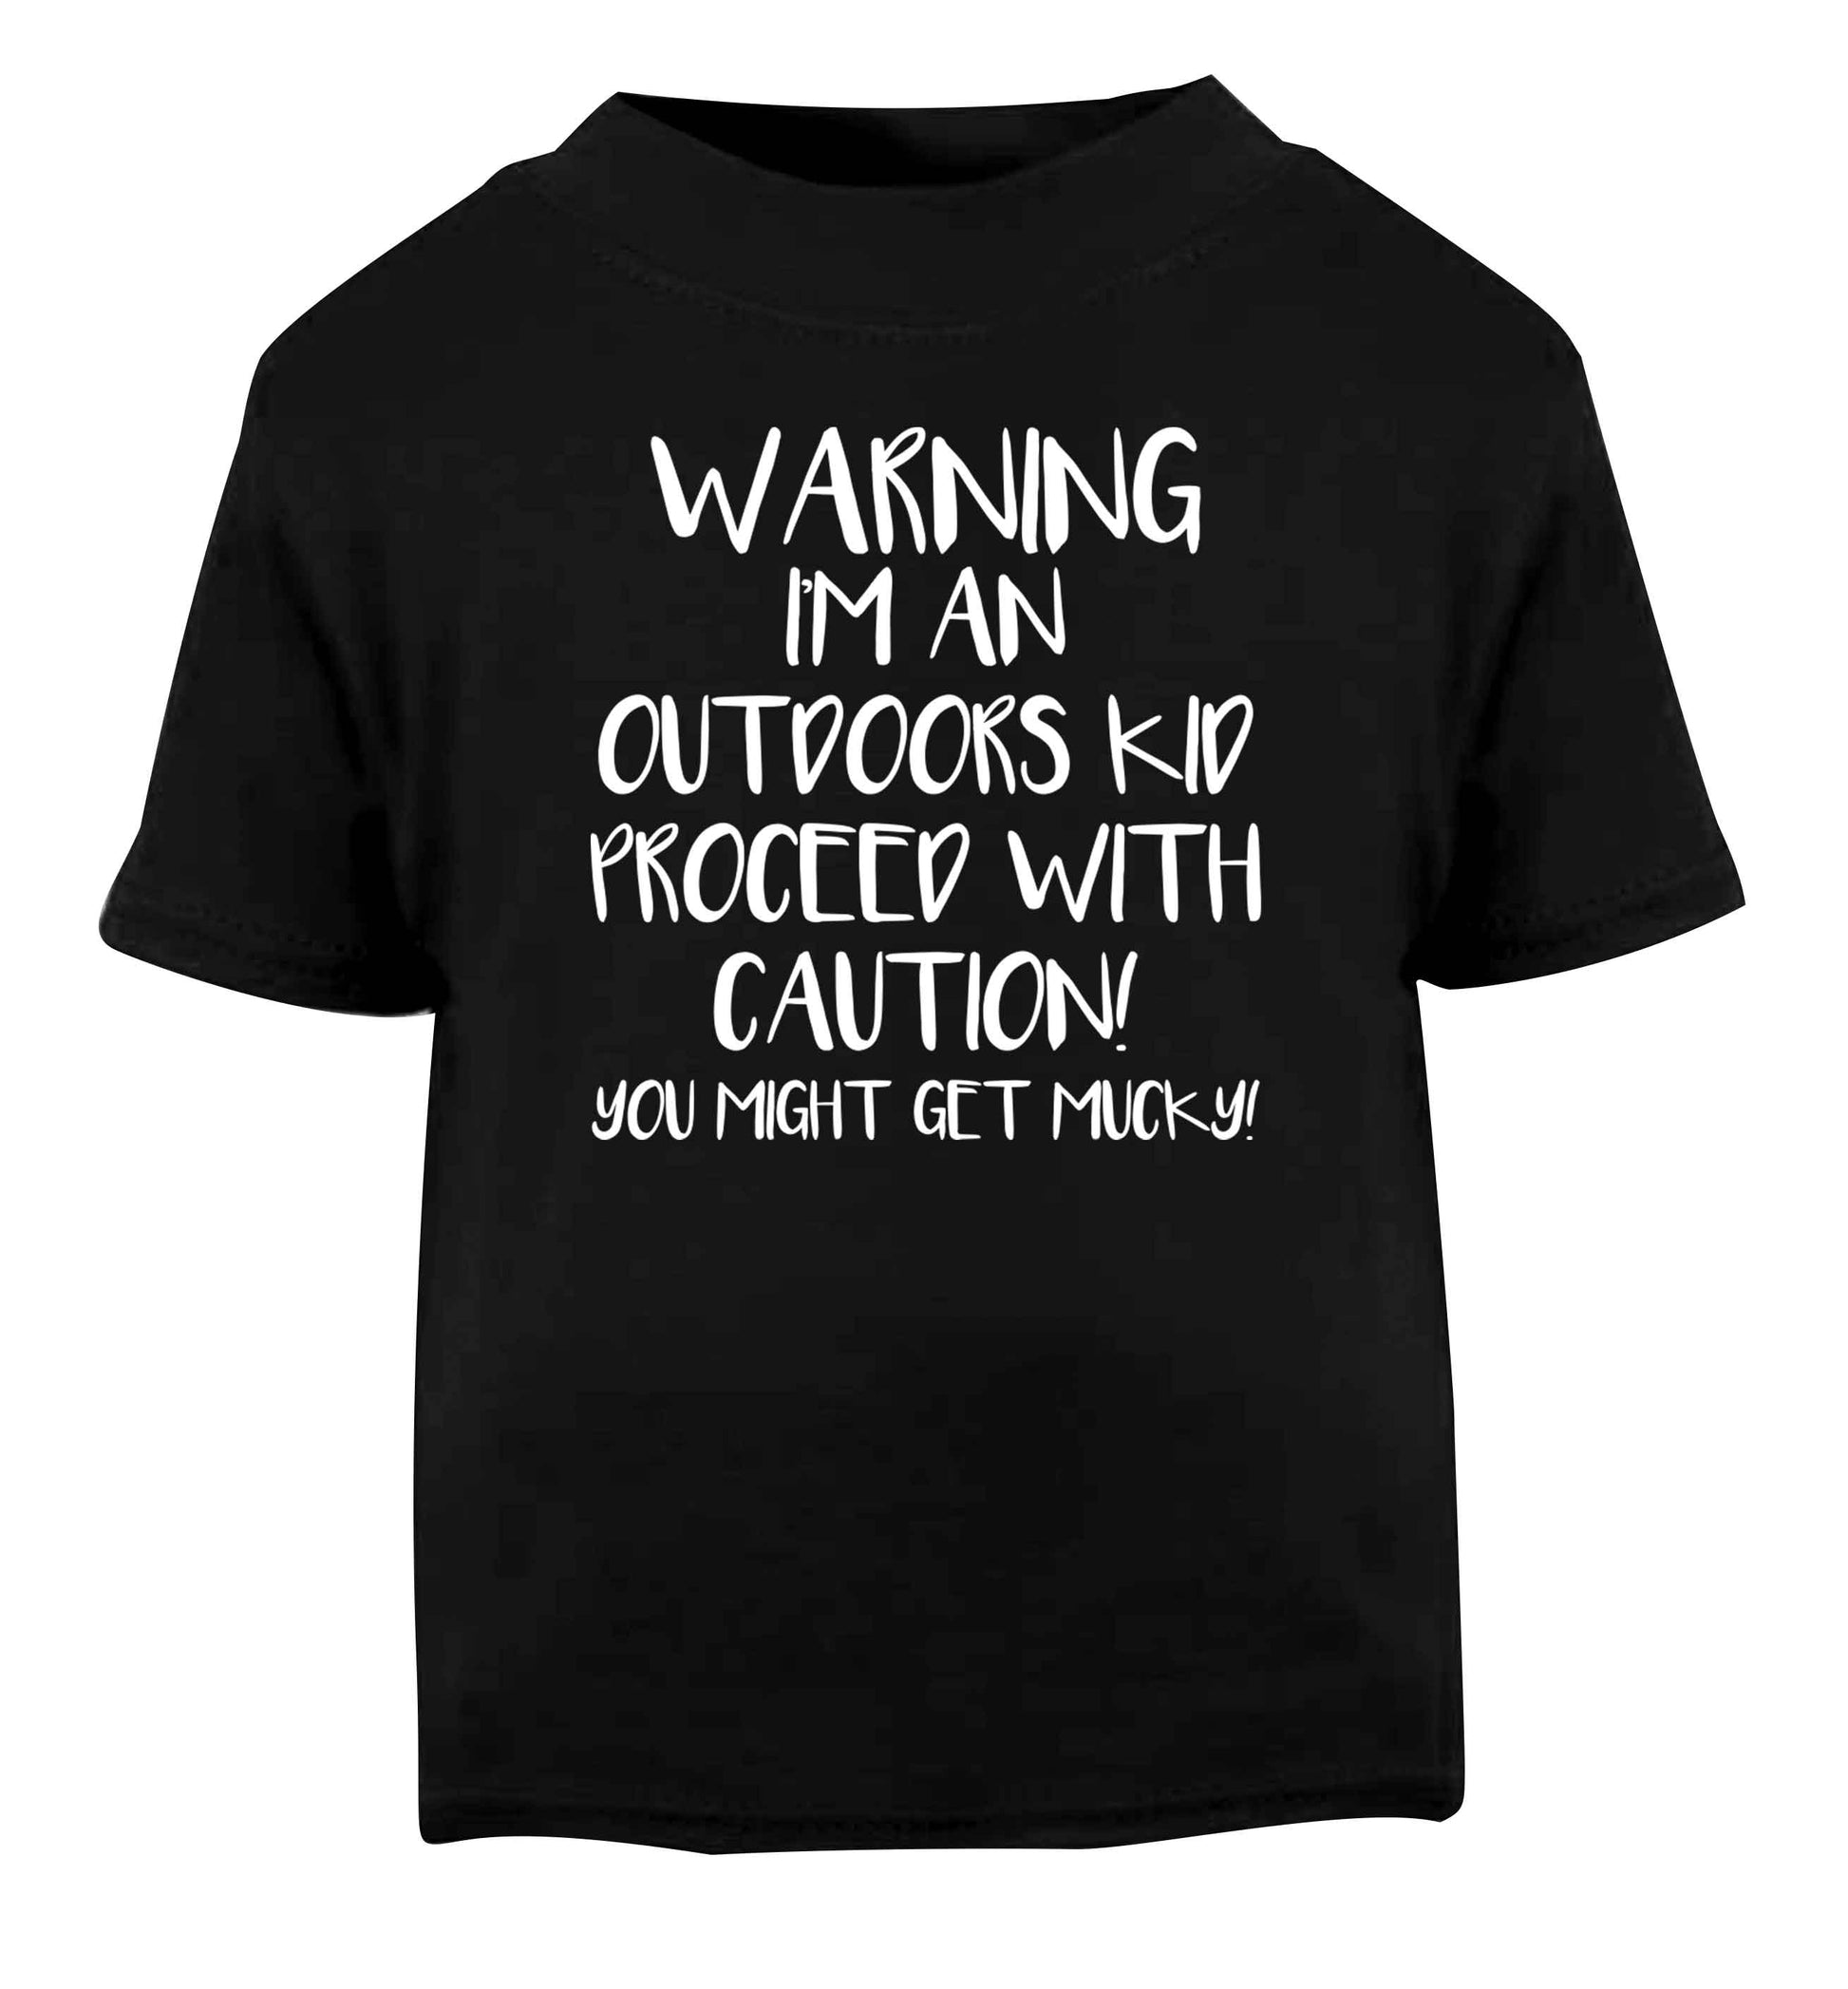 Warning I'm an outdoors kid! Proceed with caution you might get mucky Black Baby Toddler Tshirt 2 years